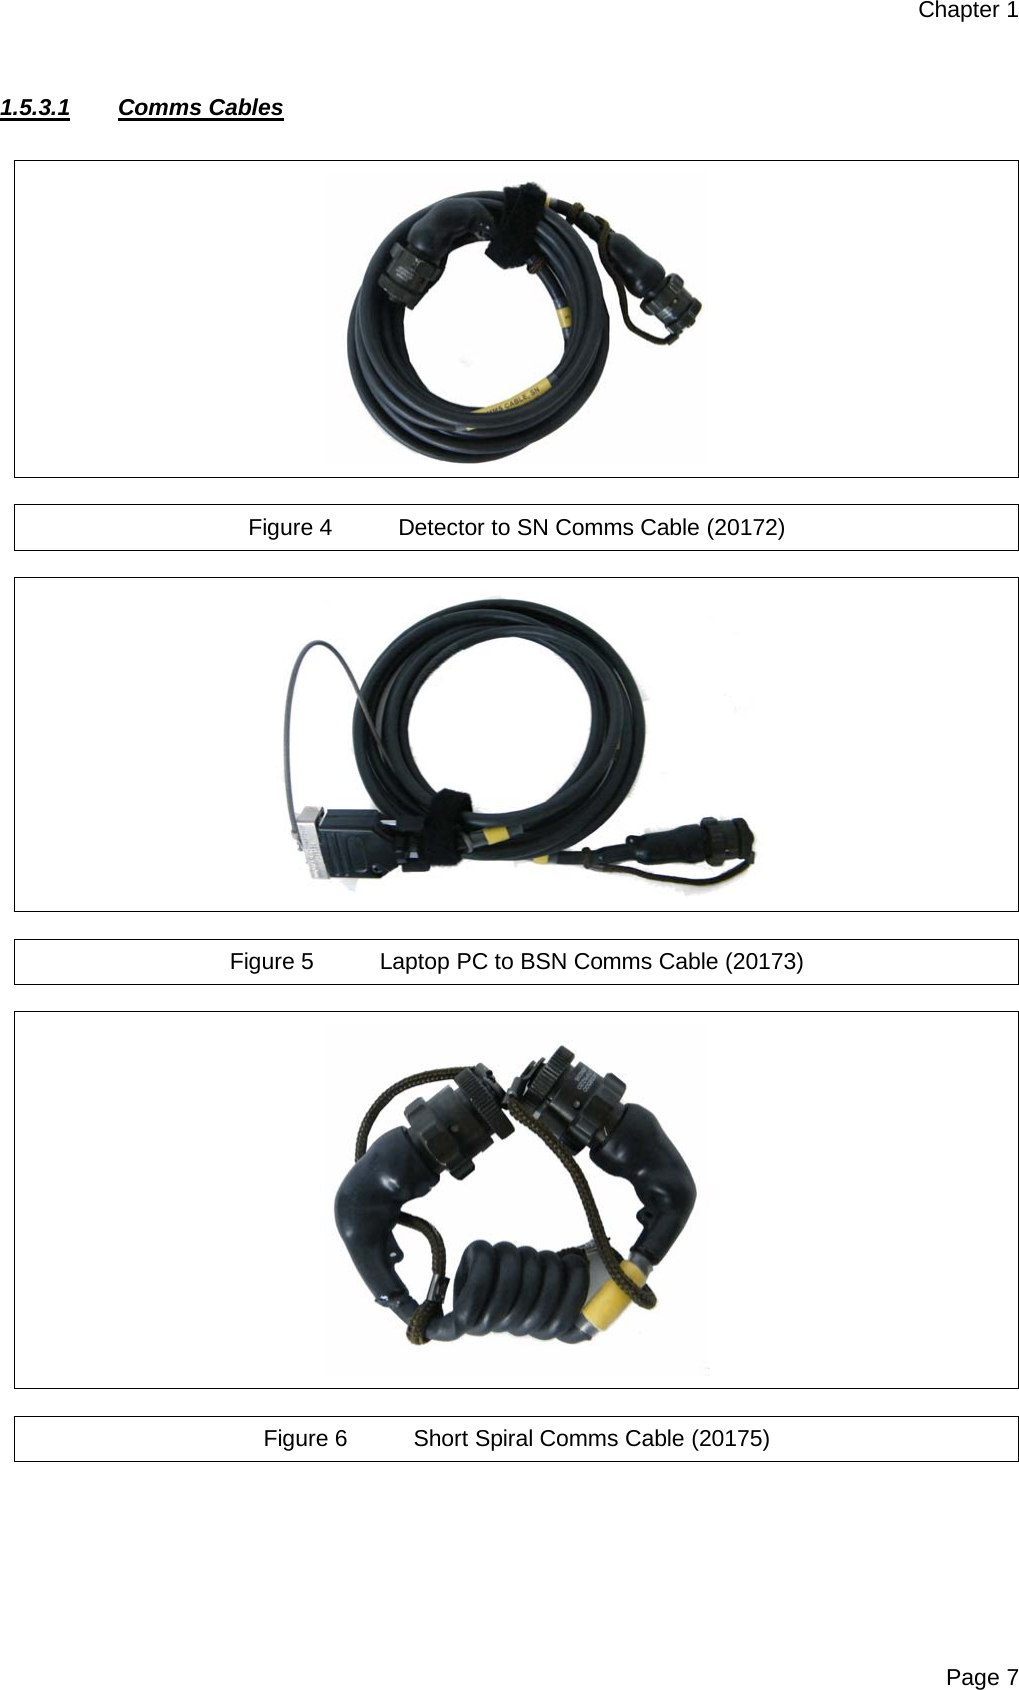 Chapter 1 Page 7  1.5.3.1 Comms Cables    Figure 4 Detector to SN Comms Cable (20172)    Figure 5 Laptop PC to BSN Comms Cable (20173)    Figure 6 Short Spiral Comms Cable (20175)  